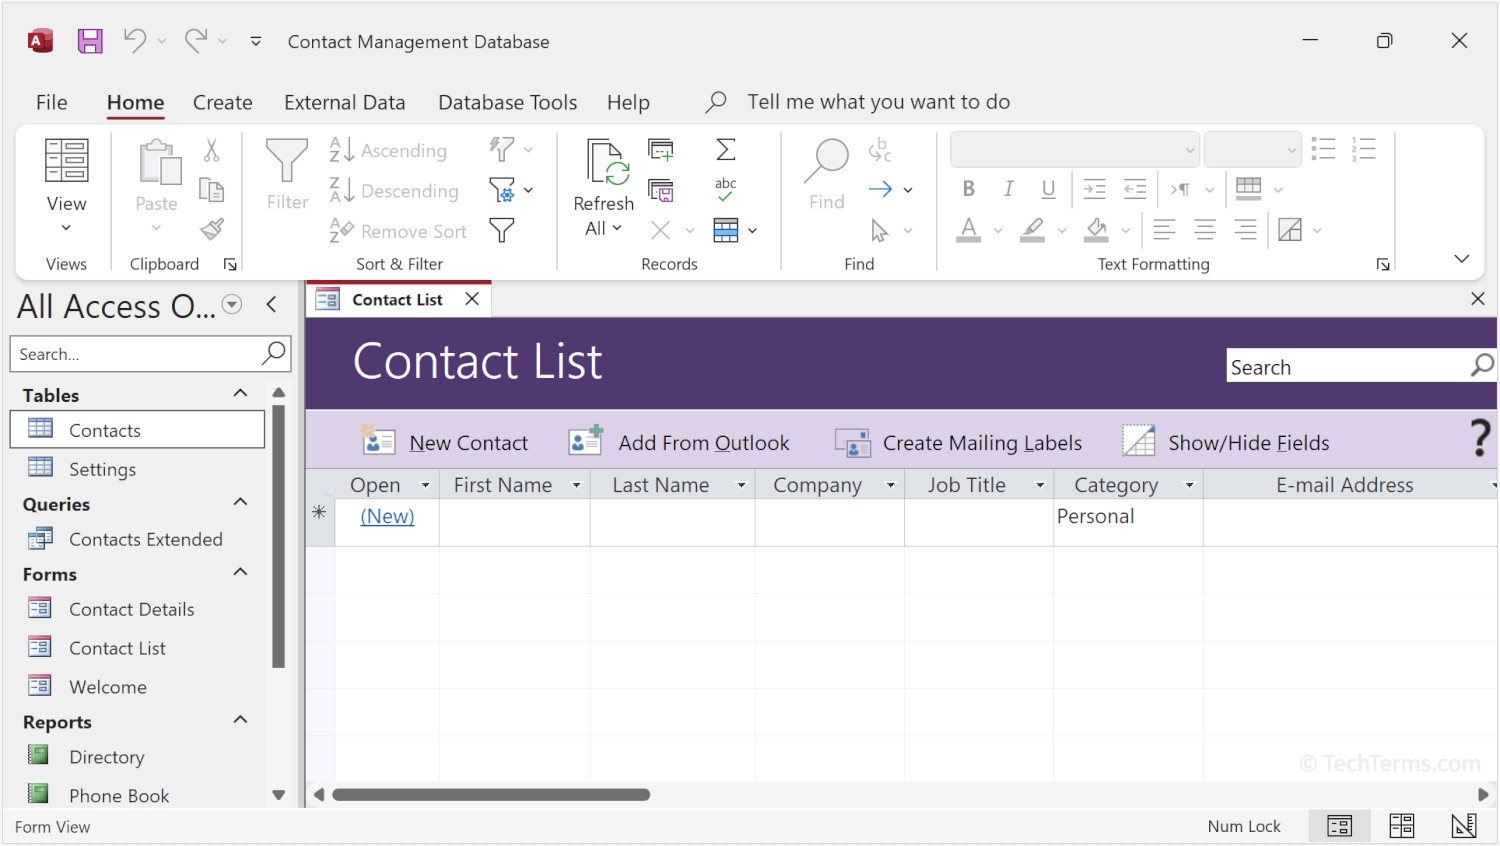 A new Contacts List database in Access